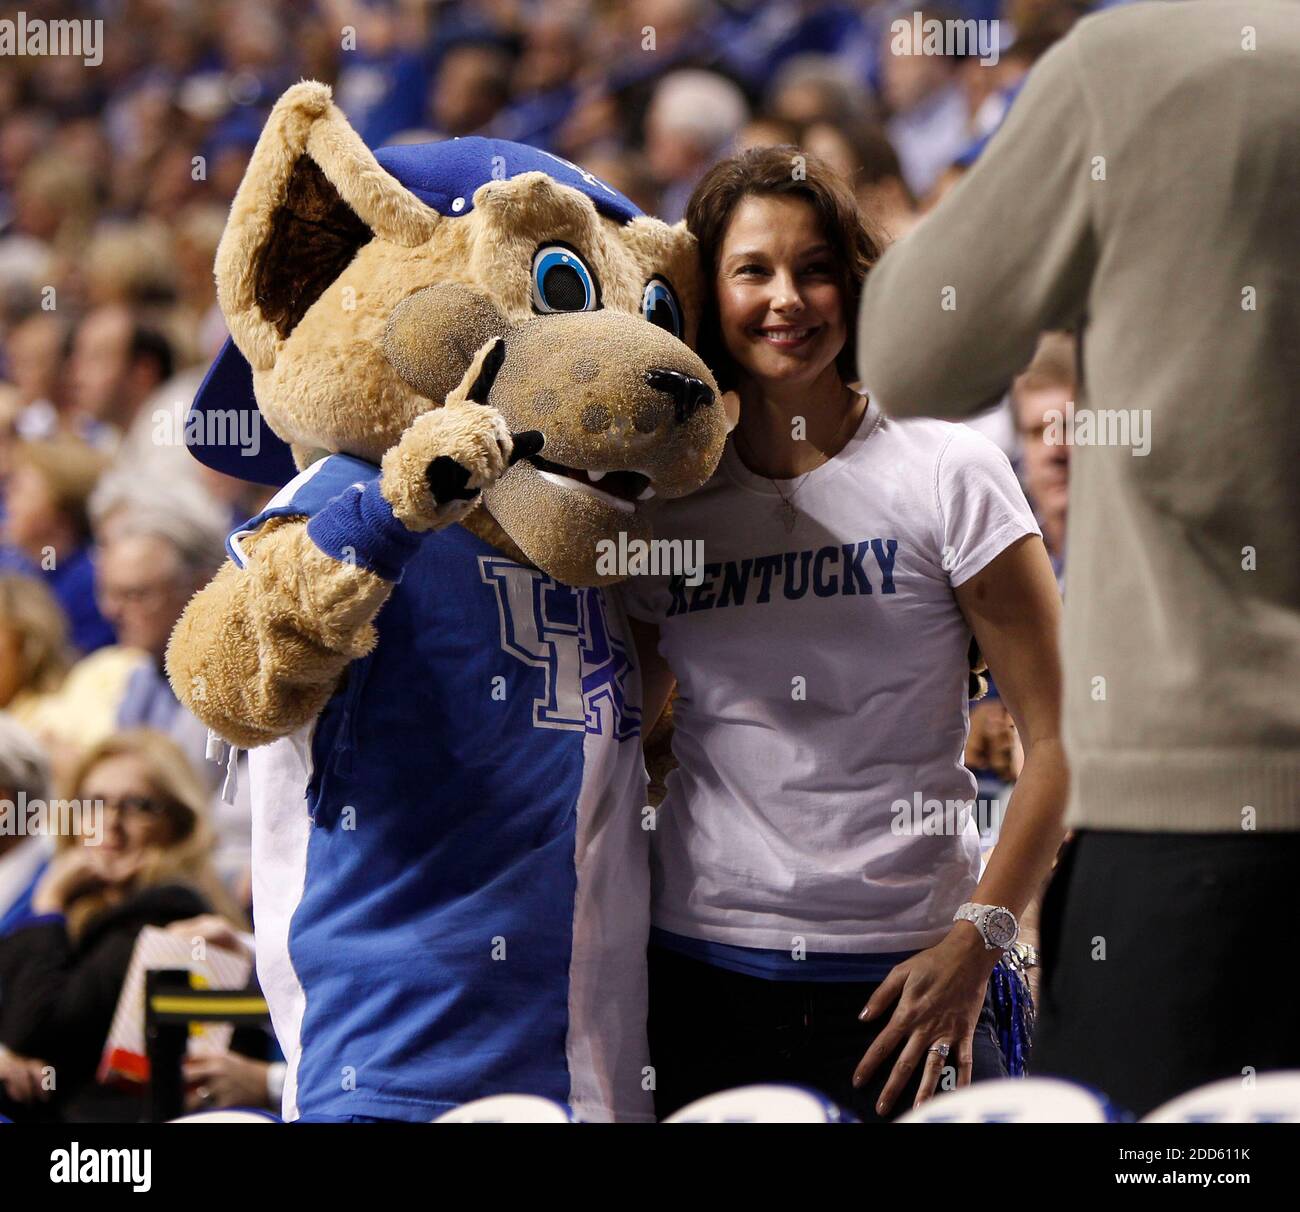 NO FILM, NO VIDEO, NO TV, NO DOCUMENTARY - Kentucky fan Ashley Judd, middle, poses with the school's mascot during a time out against Georgia at Rupp Arena in Lexington, Kentucky, USA on Saturday, January 29, 2011. Kentucky slipped past Georgia, 66-60. Photo by Mark Cornelison/Lexington Herald-Leader/MCT/ABACAPRESS.COM Stock Photo